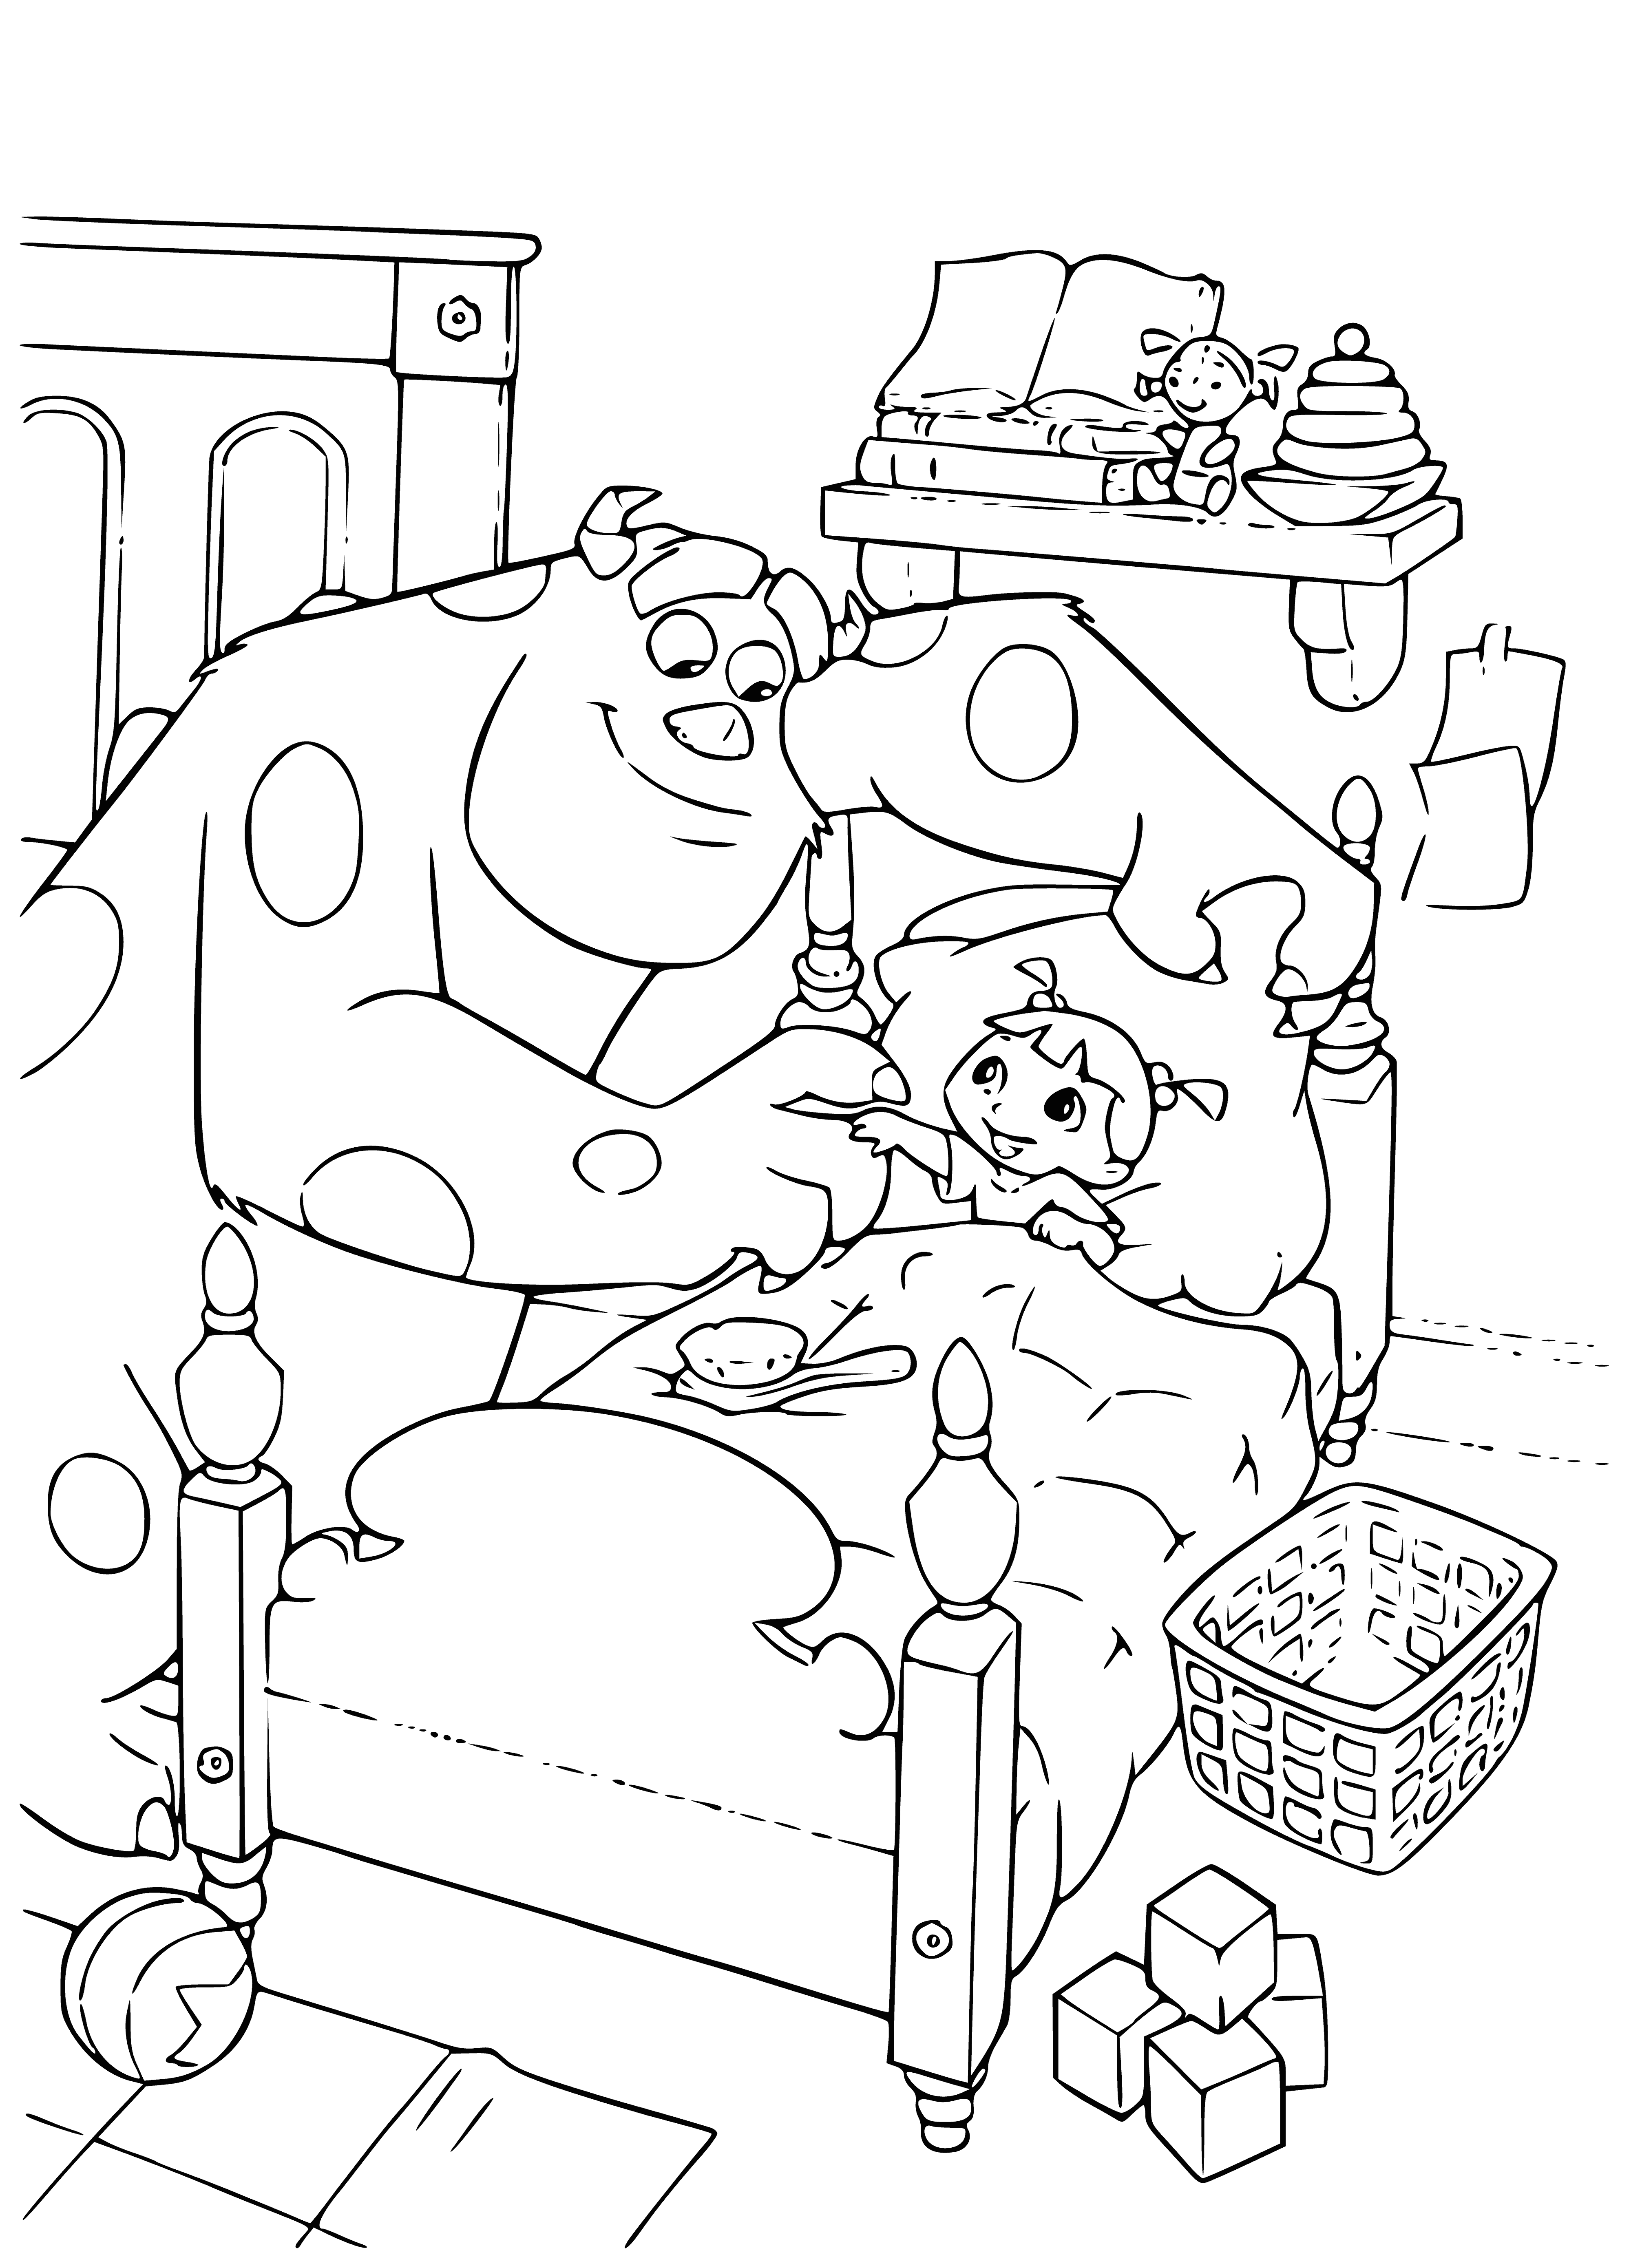 coloring page: Sulley & Mike protect a little girl reaching for a T-shirt, Sulley looks concerned, Mike looks relieved.